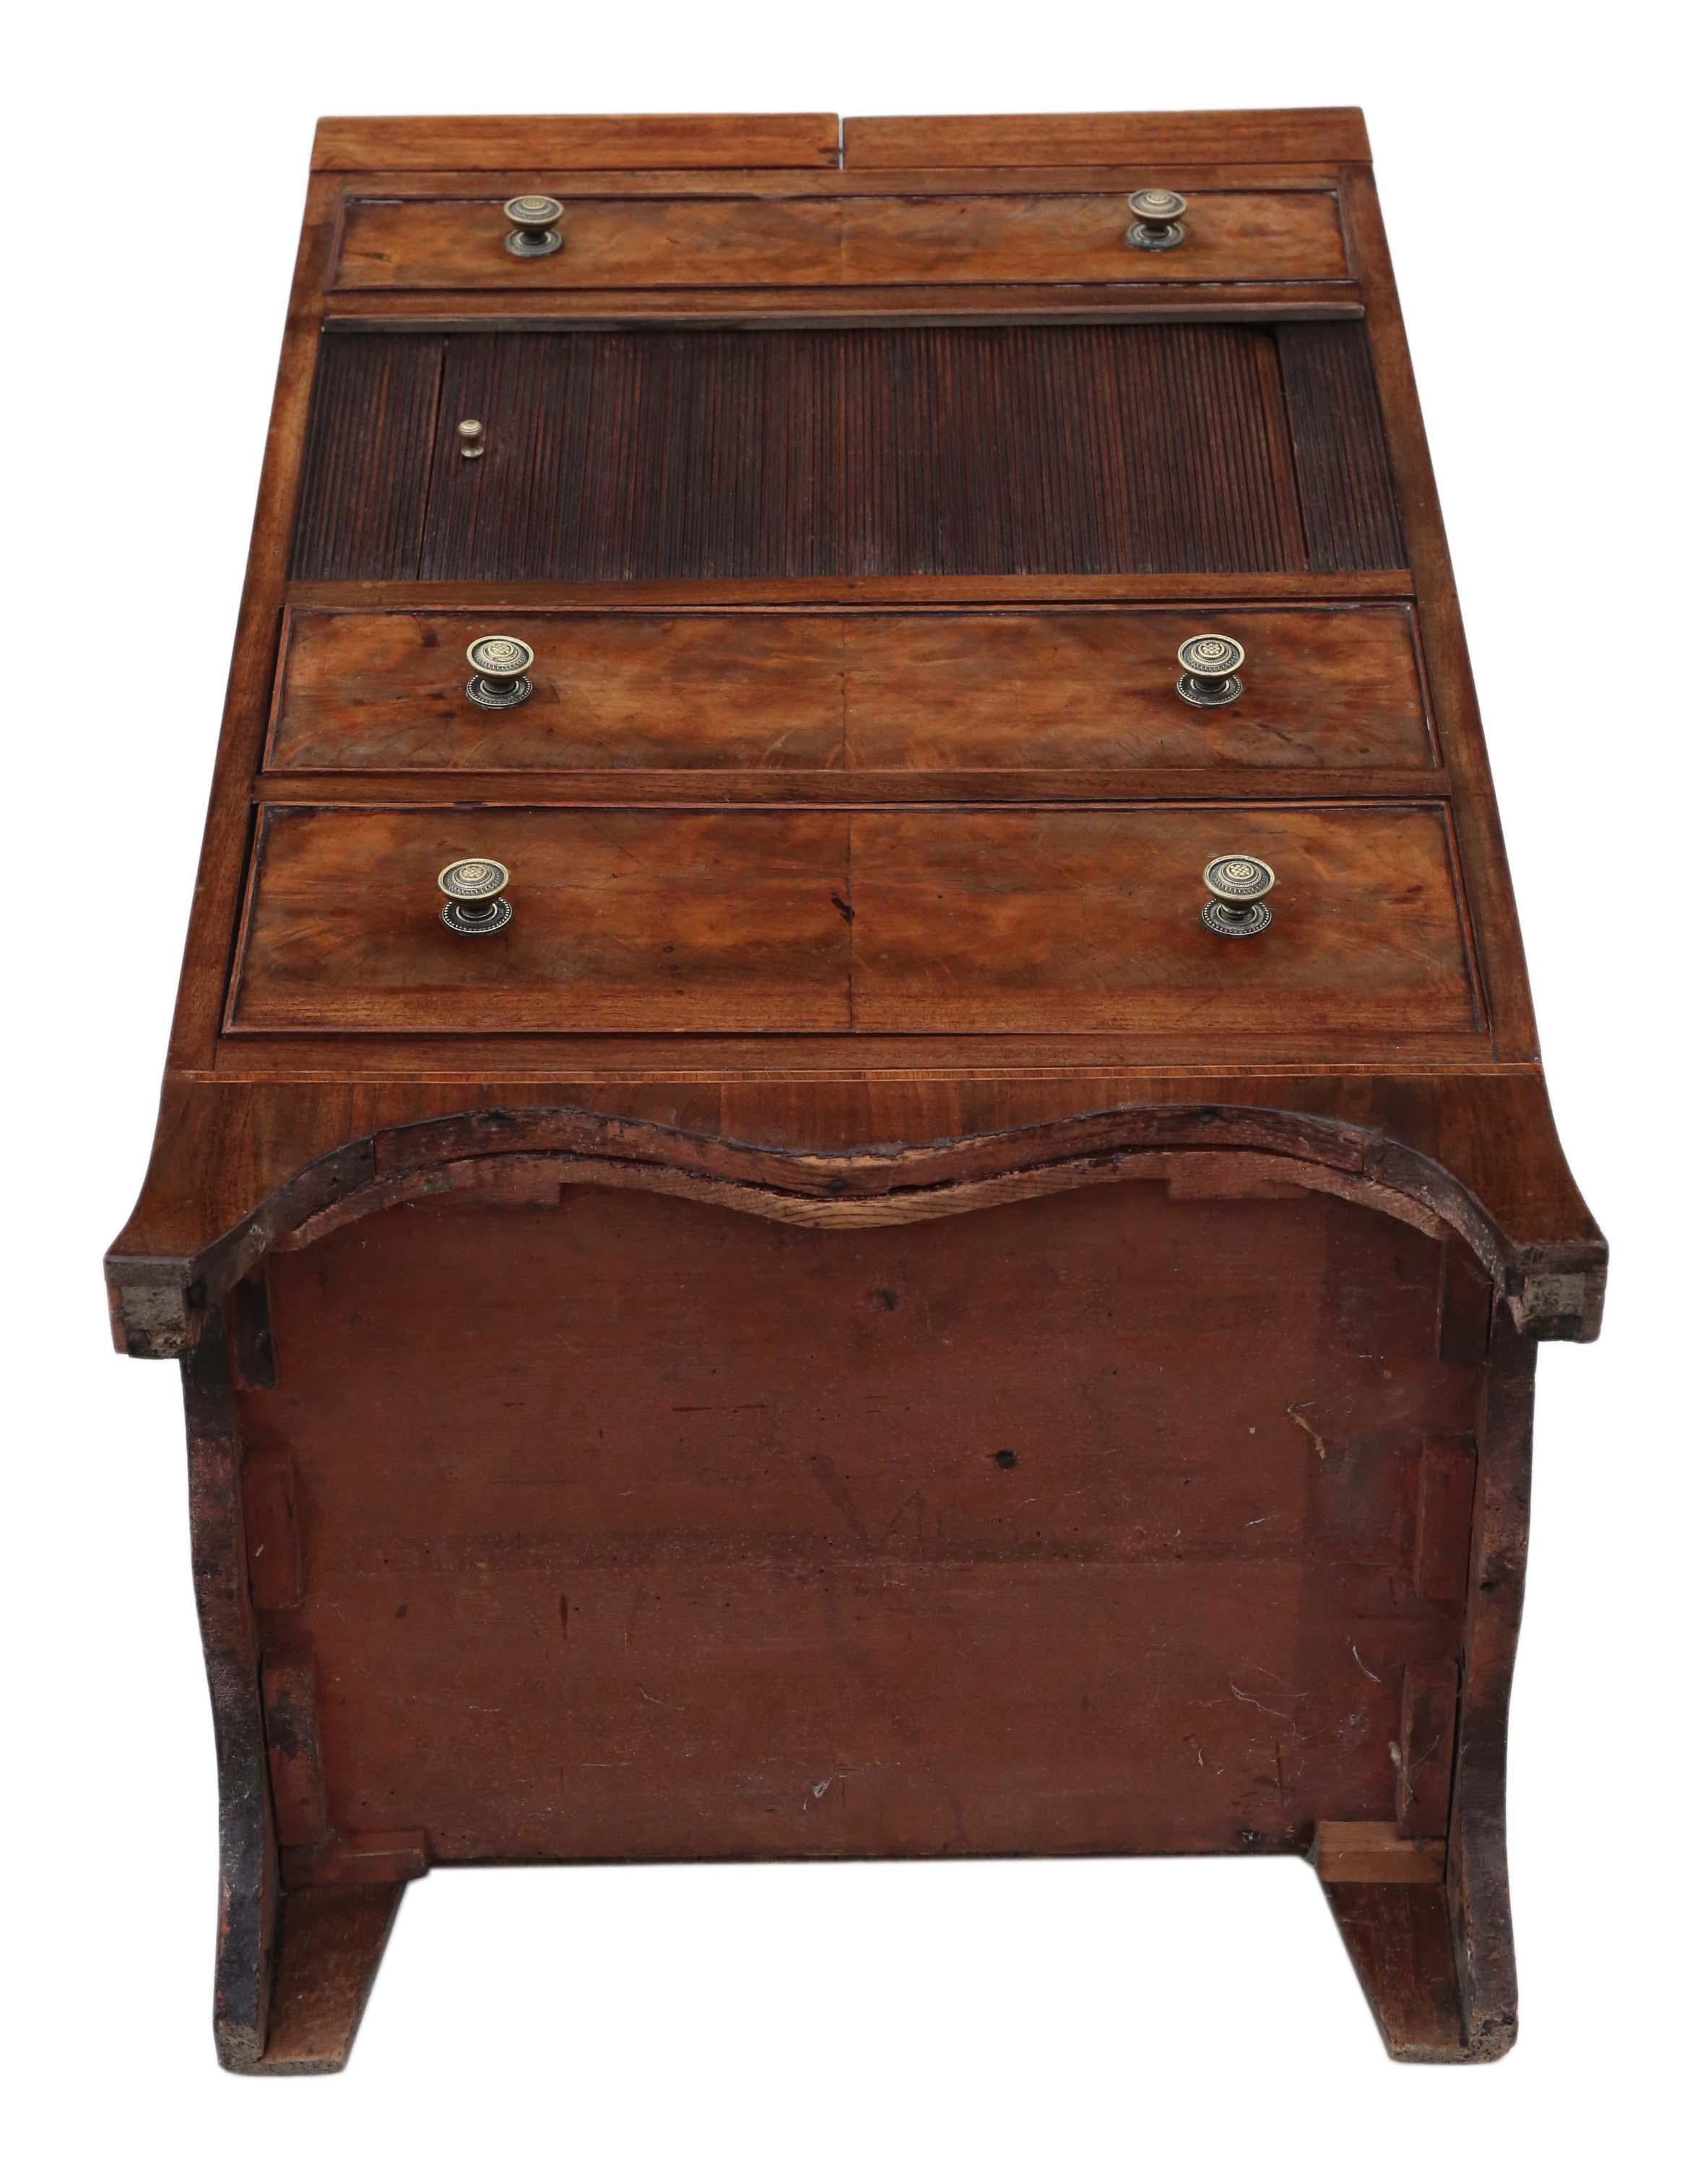 Antique Large Flame Mahogany Washstand Bedside Table, C1800, Georgian 5